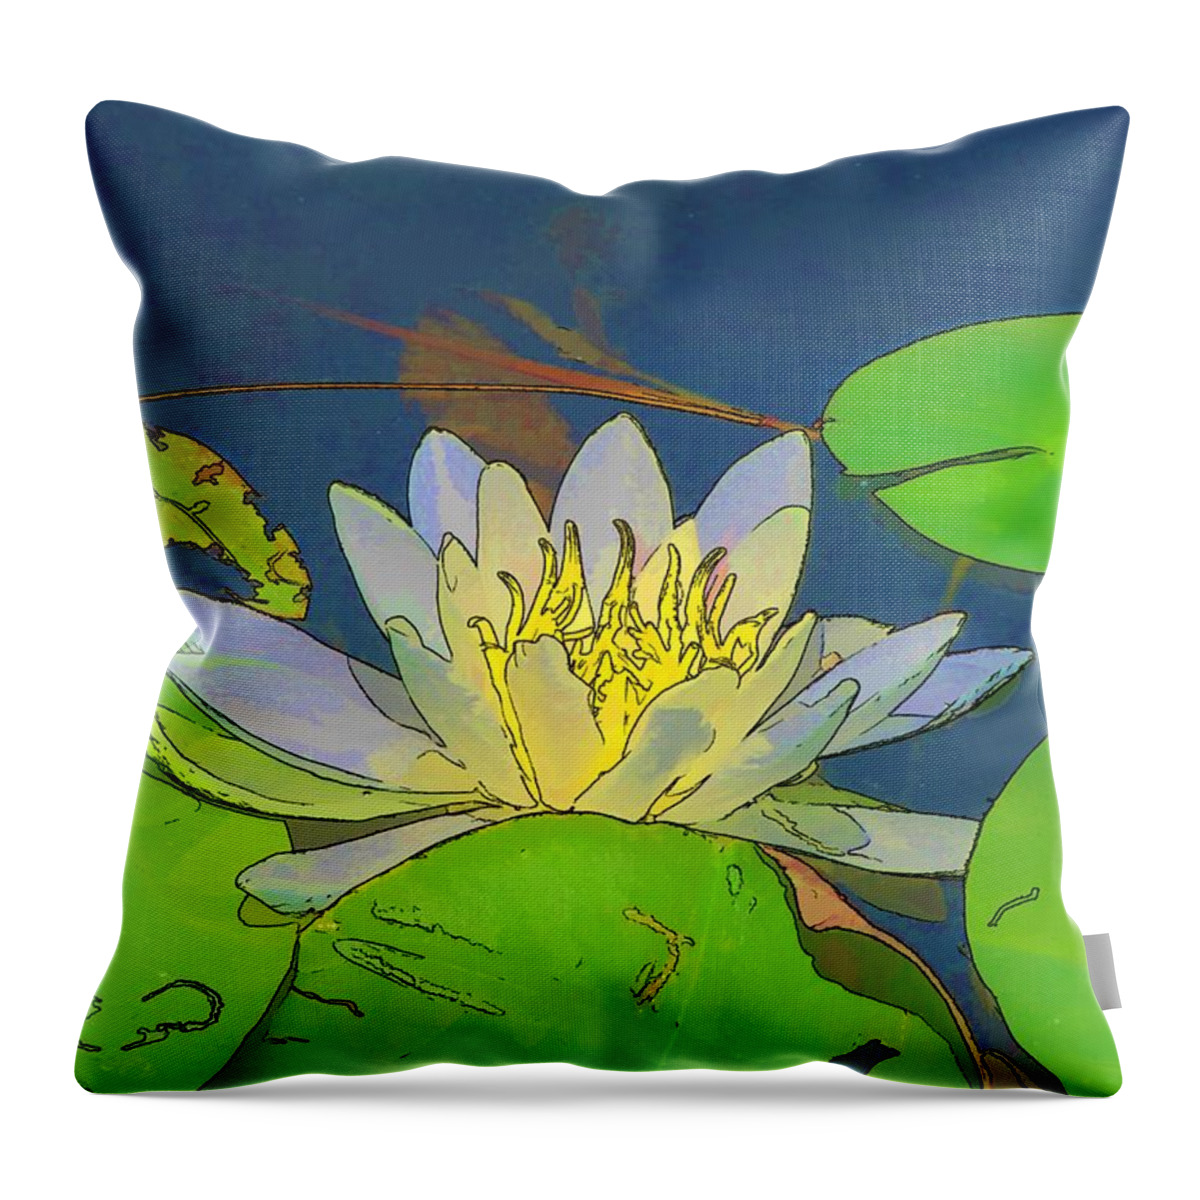 Water Throw Pillow featuring the digital art Water Lily by Maciek Froncisz